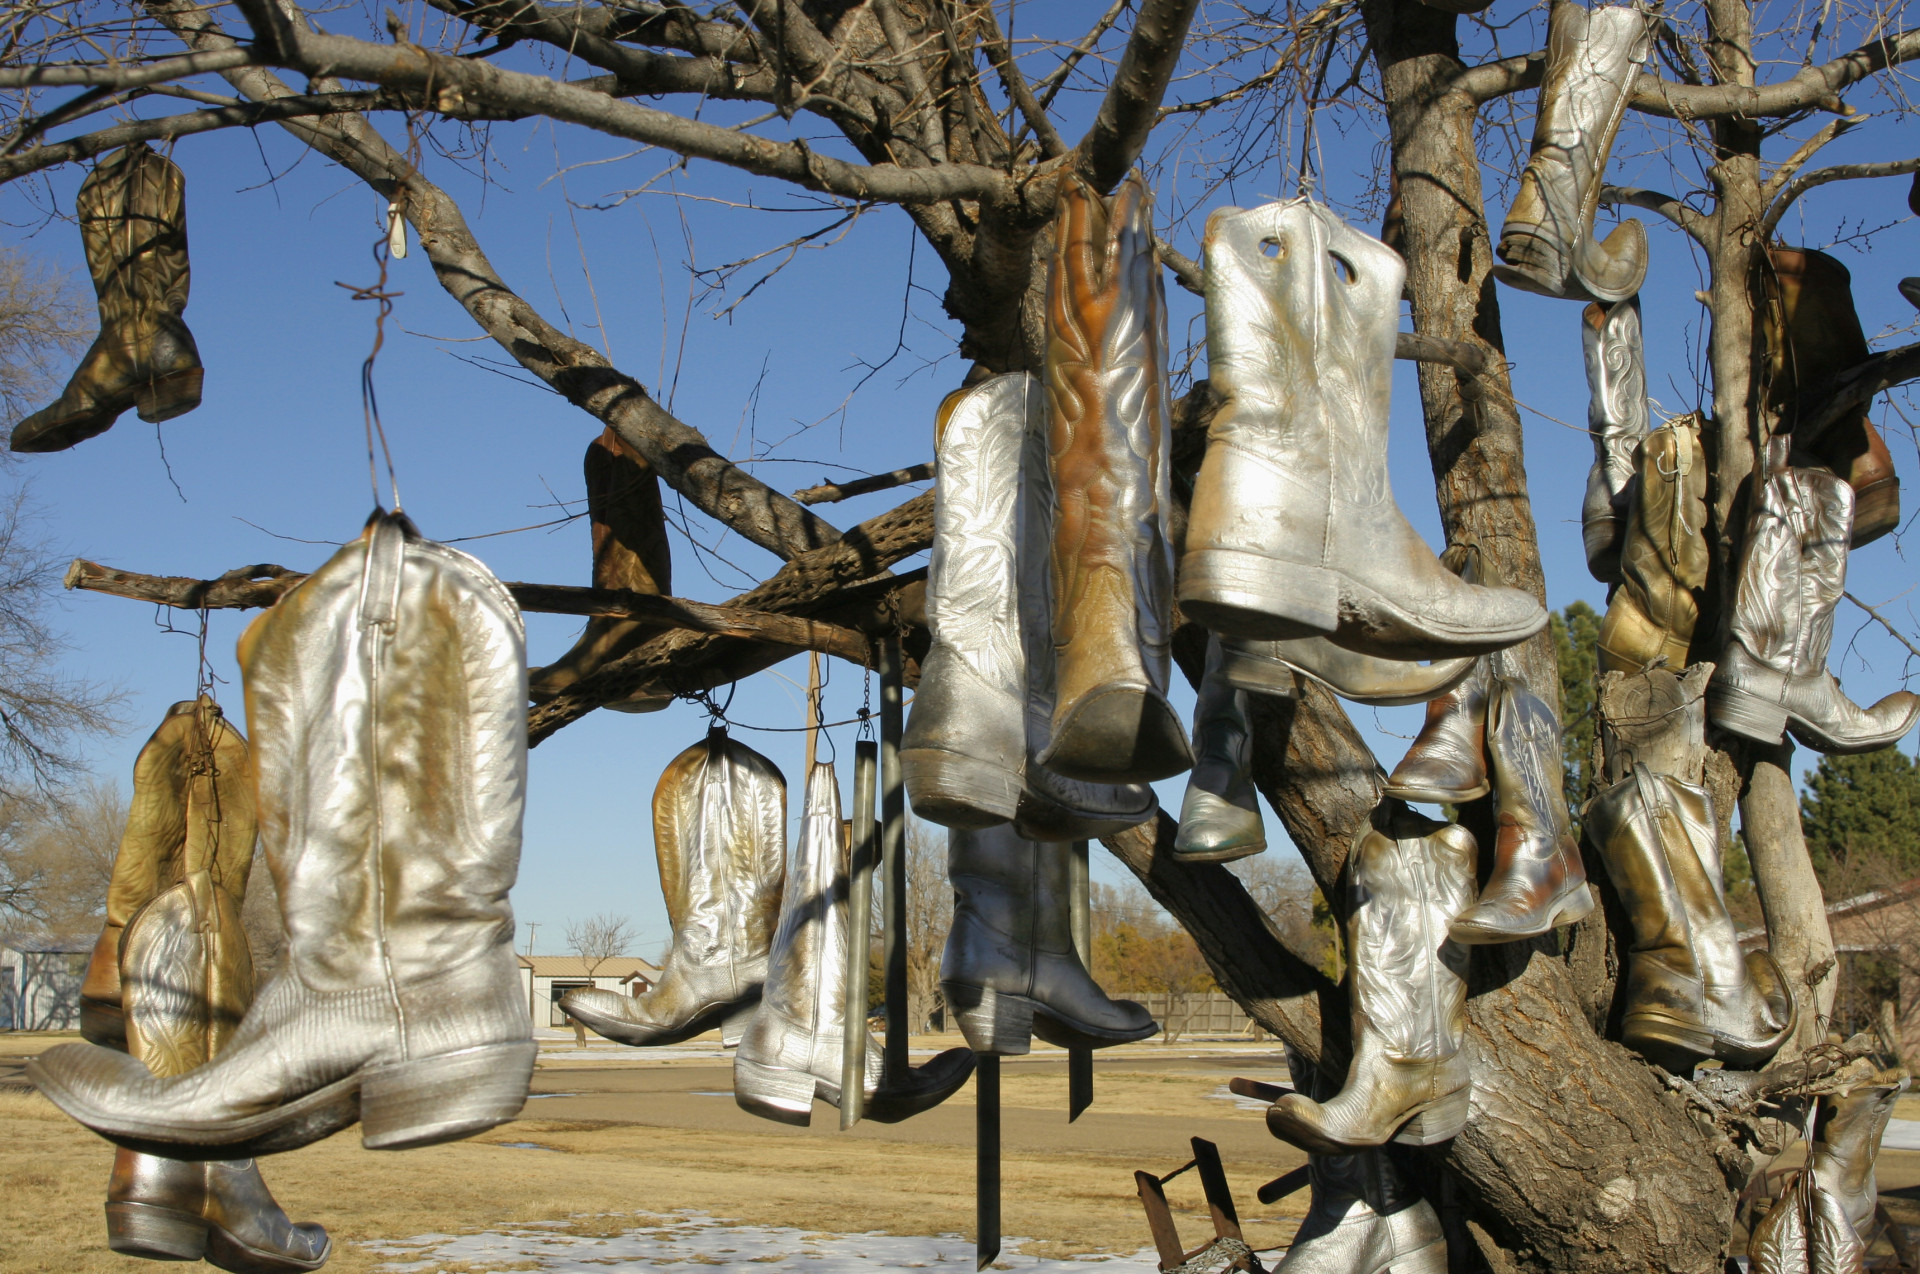 Old cowboy boots hanging from a tree in Vega, the "Crossroads of the Nation."